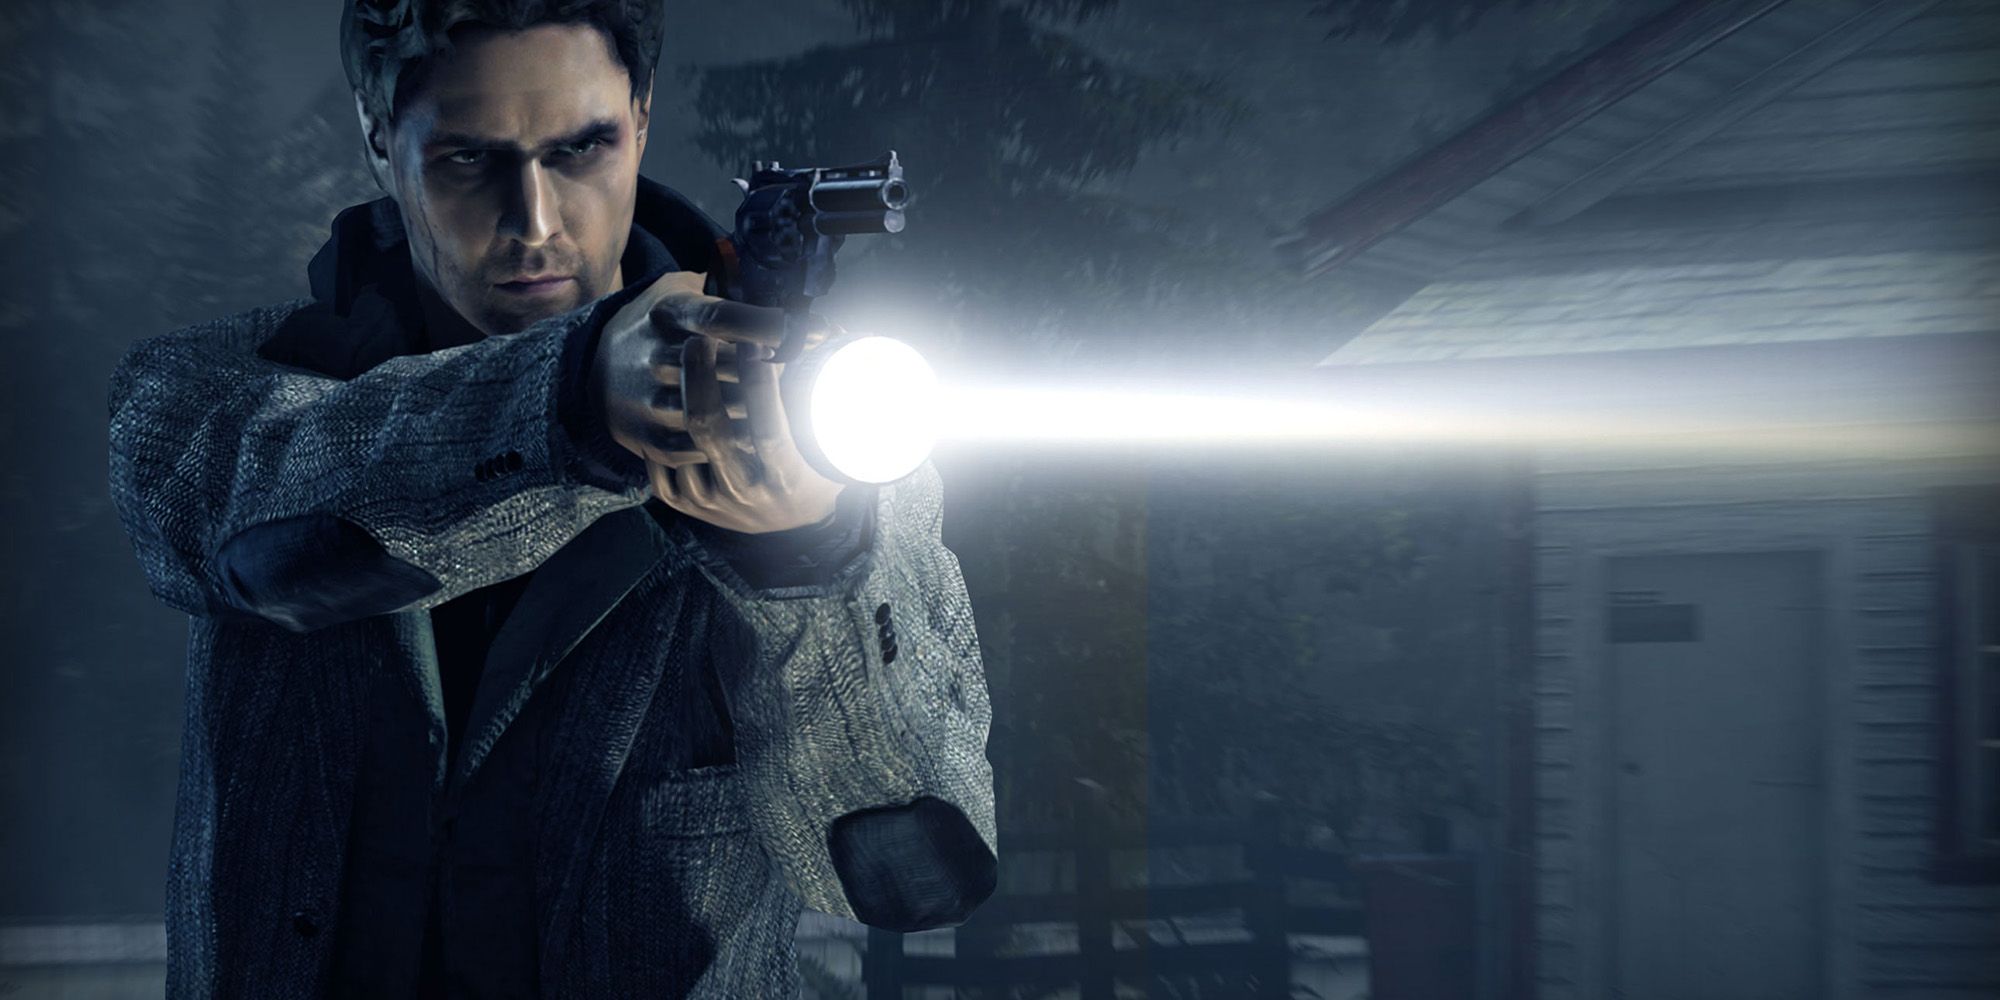 Alan Wake screen shot featuring the character with his pistol drawn